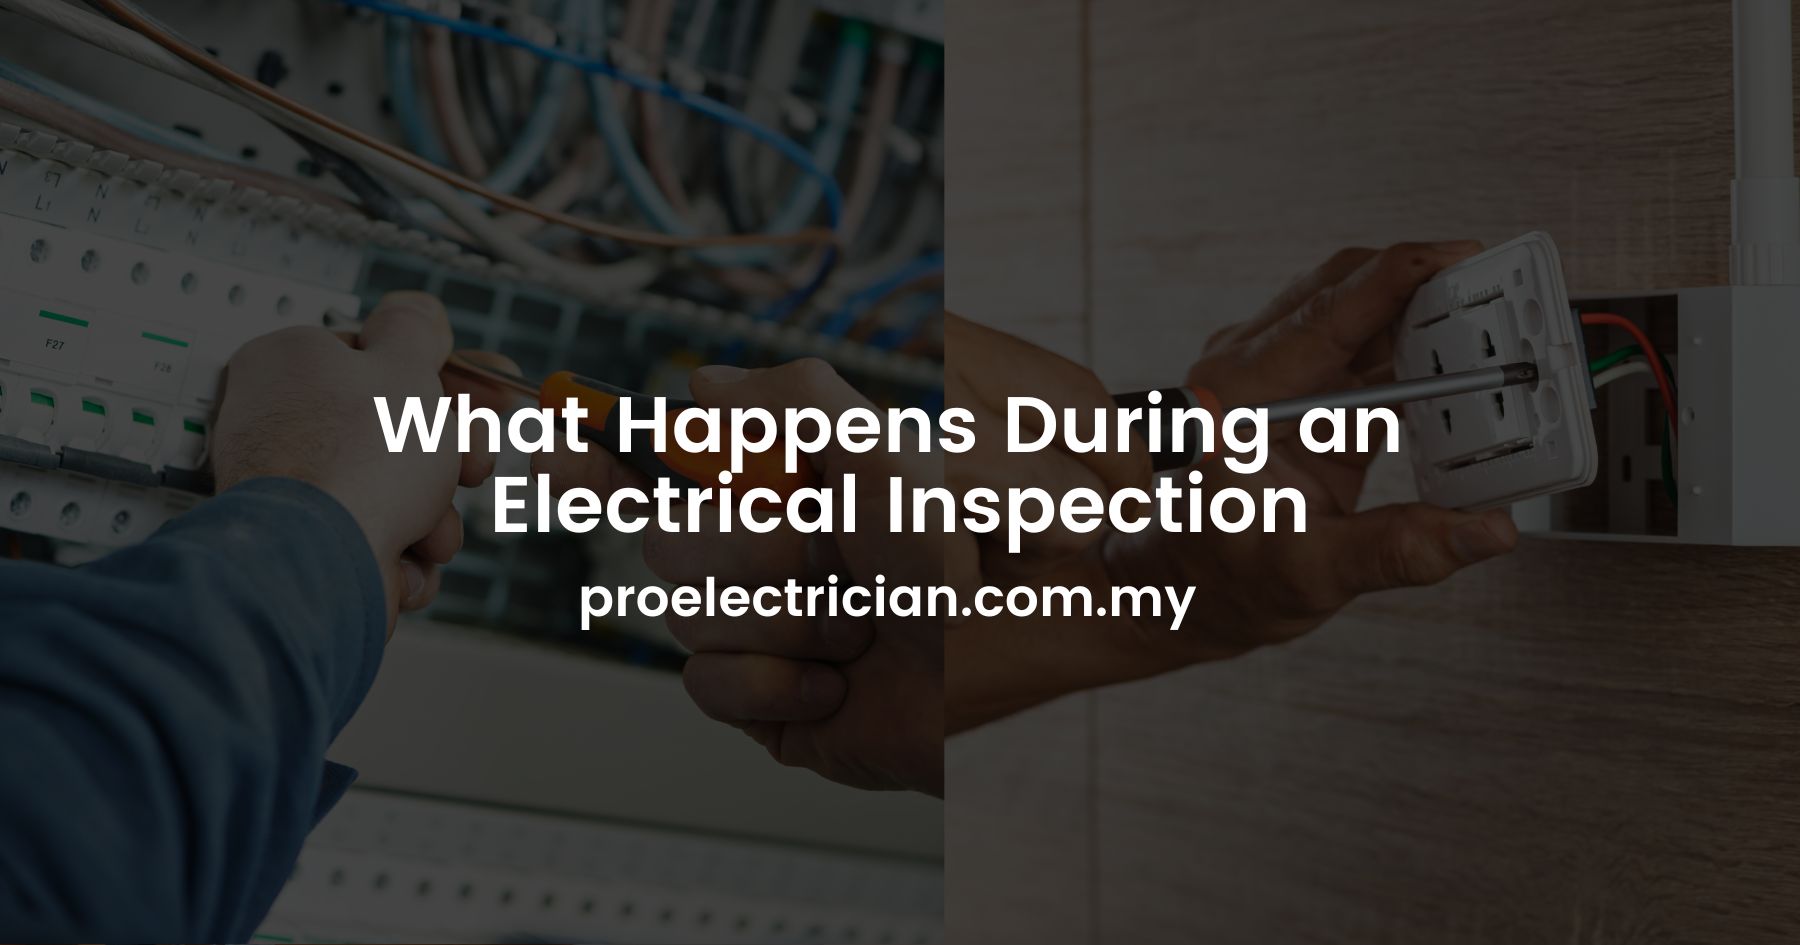 What Happens During an Electrical Inspection